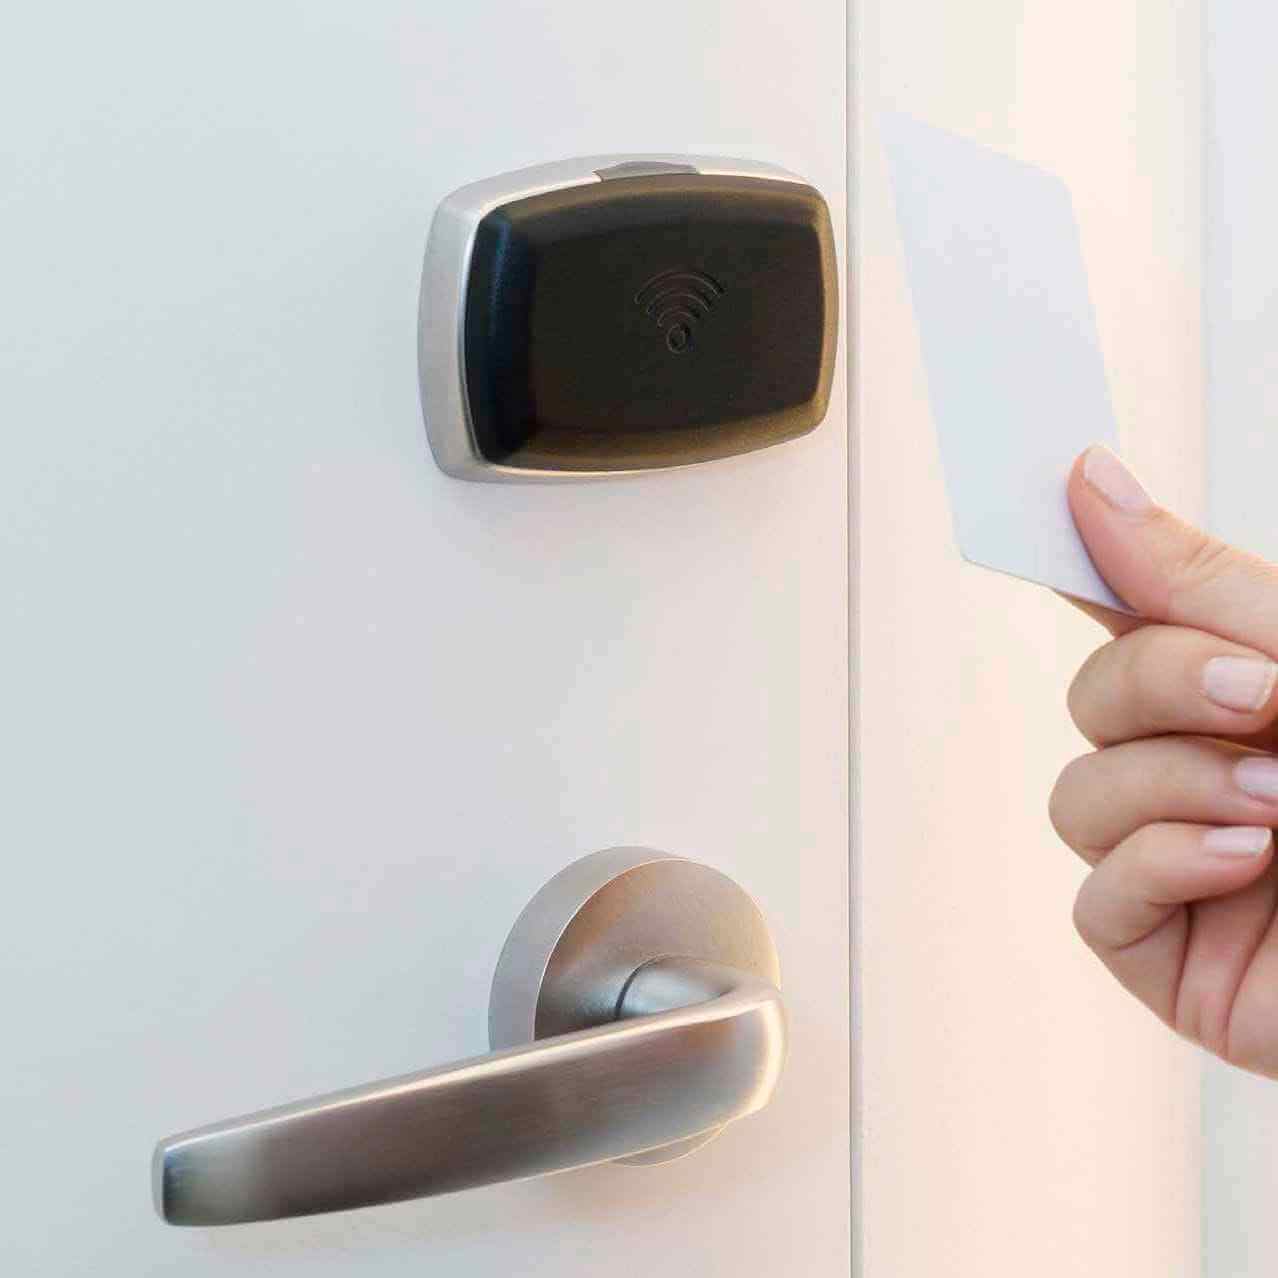 What will you need to bypass a key card lock